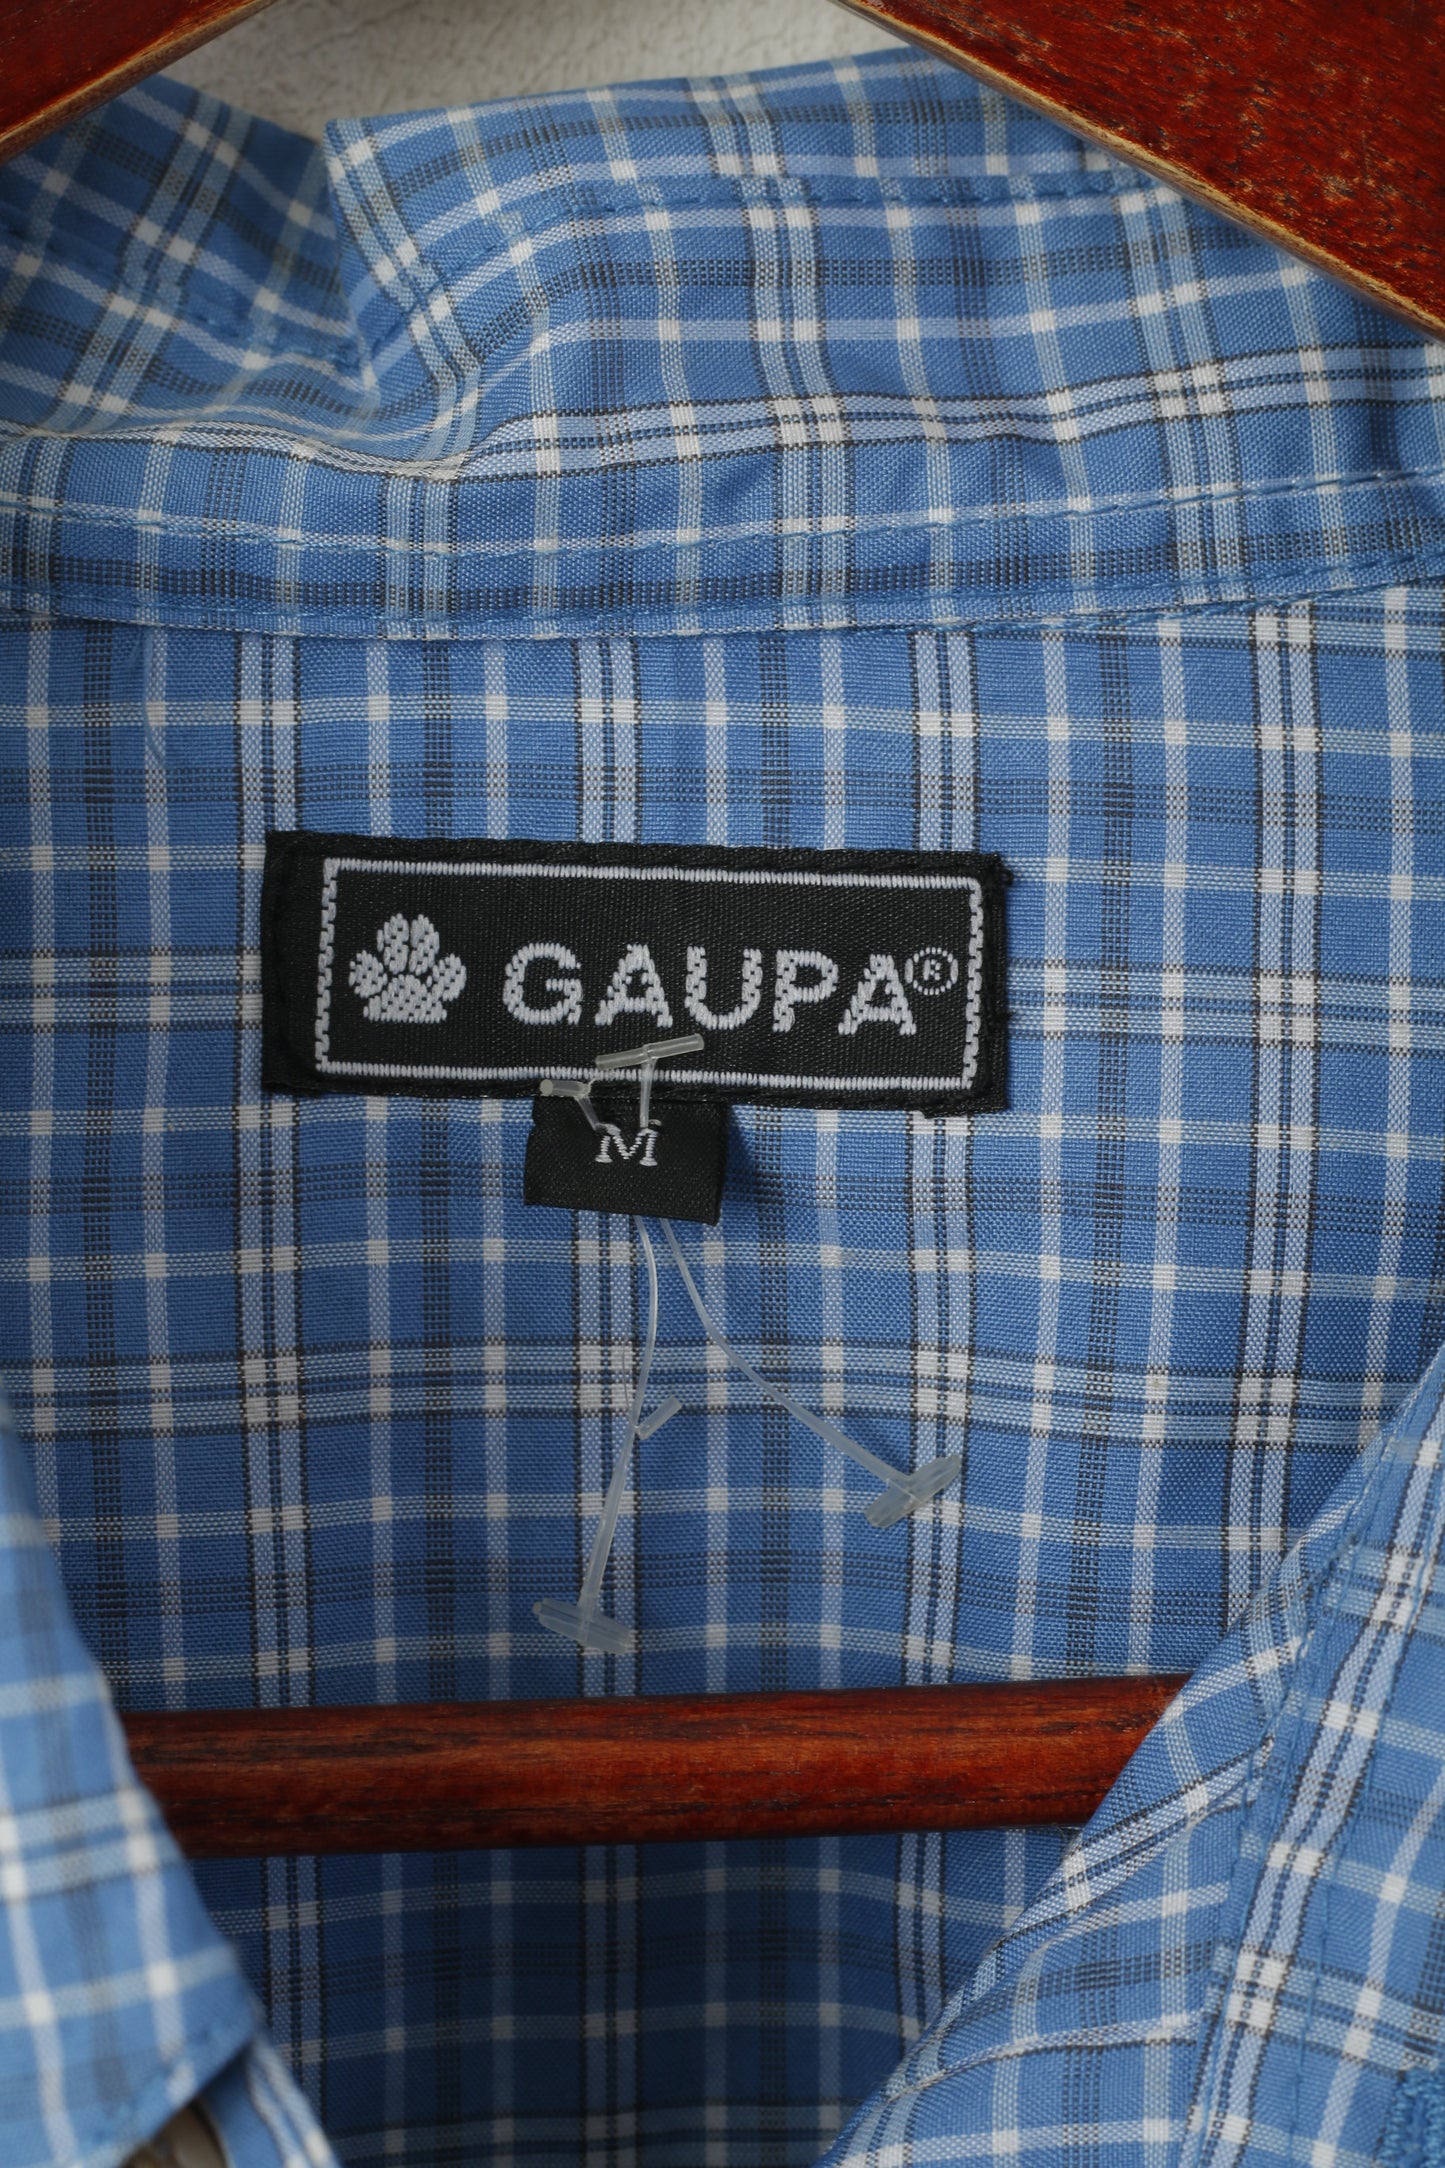 Gaupa Mes M Casual Shirt Blue Check Outdoor Rolled Up Sleeve Top